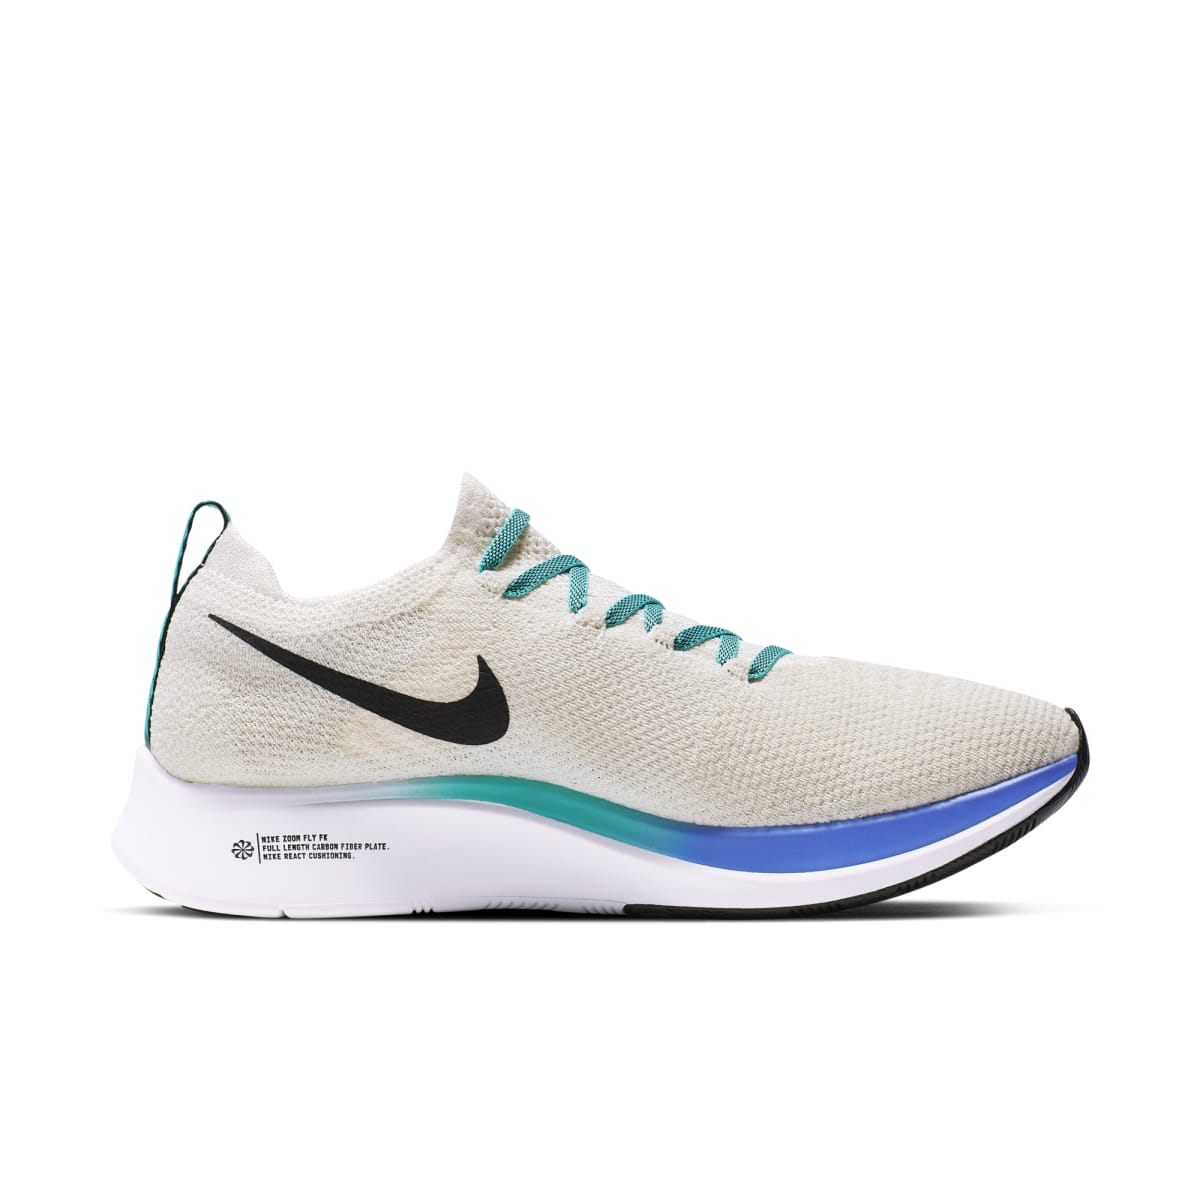 Moving Alice Founder Nike Zoom Fly Flyknit Shoes | Nike | Release Dates, Sneaker Calendar,  Prices & Collaborations